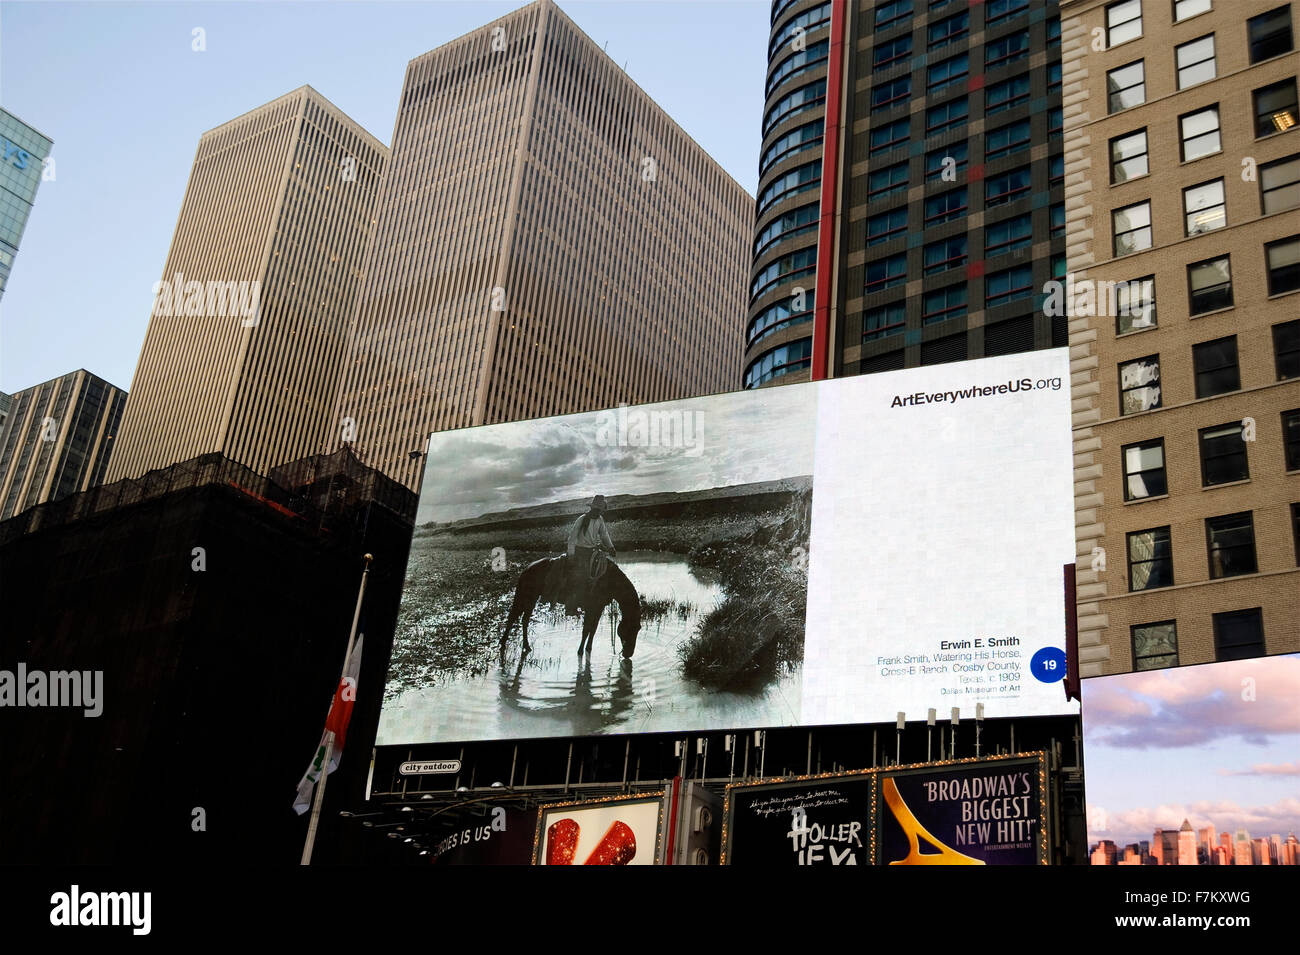 Erwin E. Smith fine art photography appears on digital billboard in New York's Times Square as part of the Art Everywhere event Stock Photo